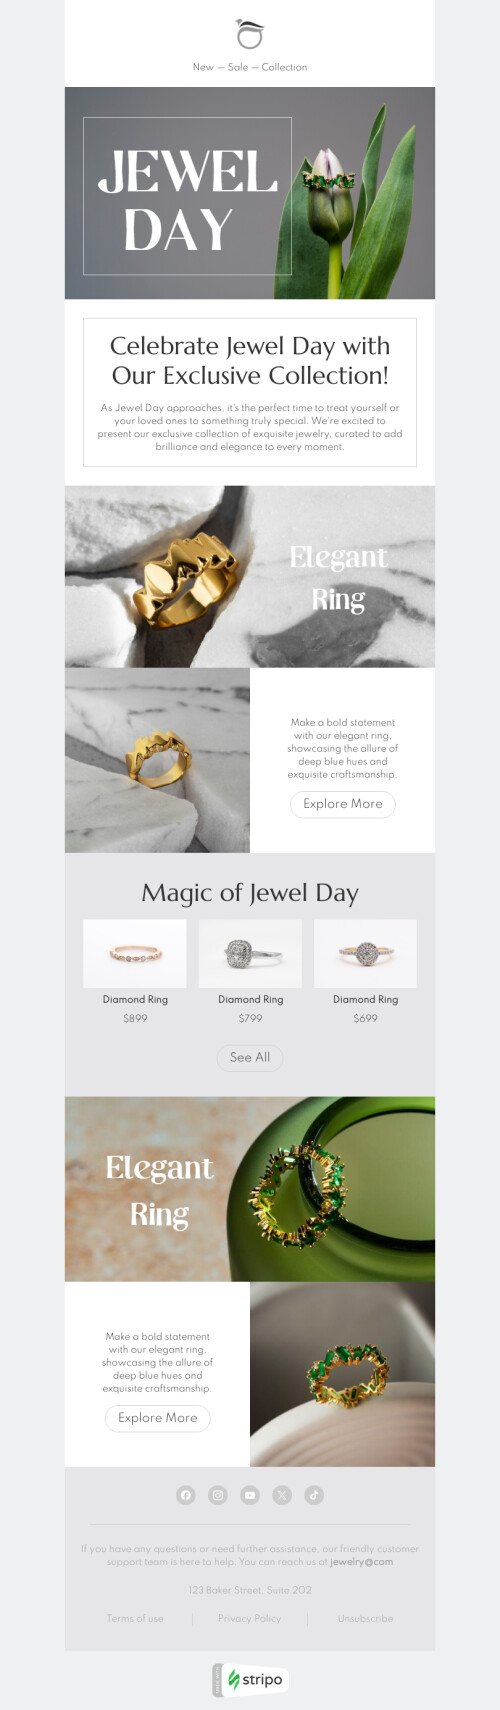 Jewel Day email template "Elegant ring​" for jewelry industry mobile view